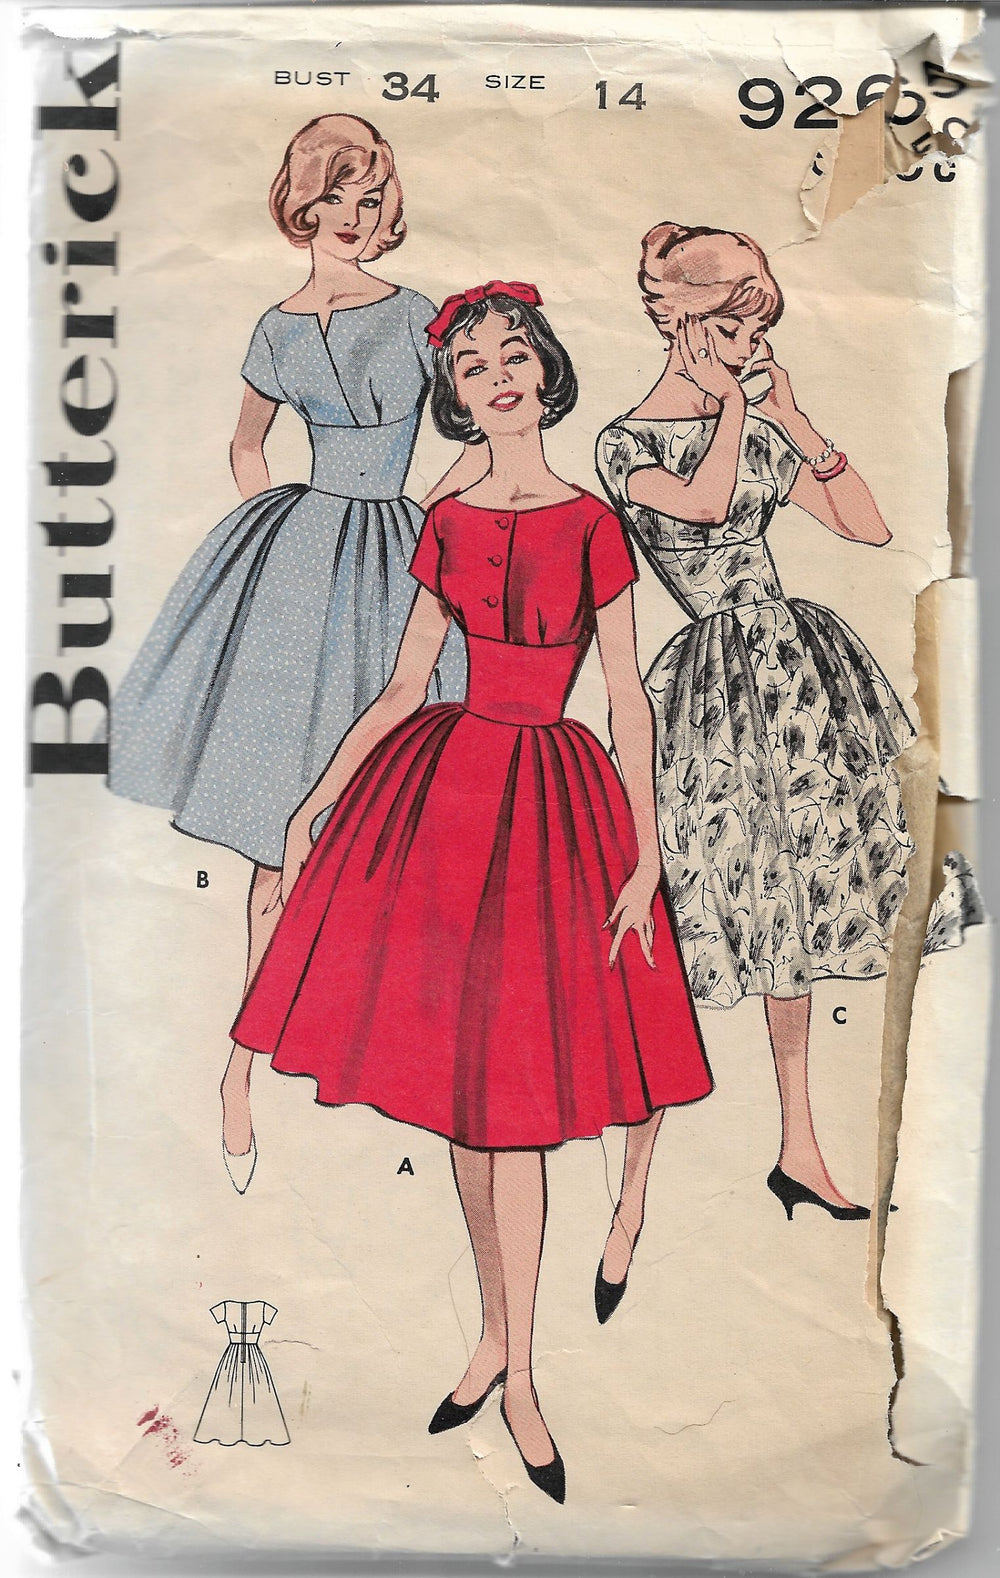 Butterick 9265 Ladies Rockabilly Party Dress Vintage Sewing Pattern 1960s